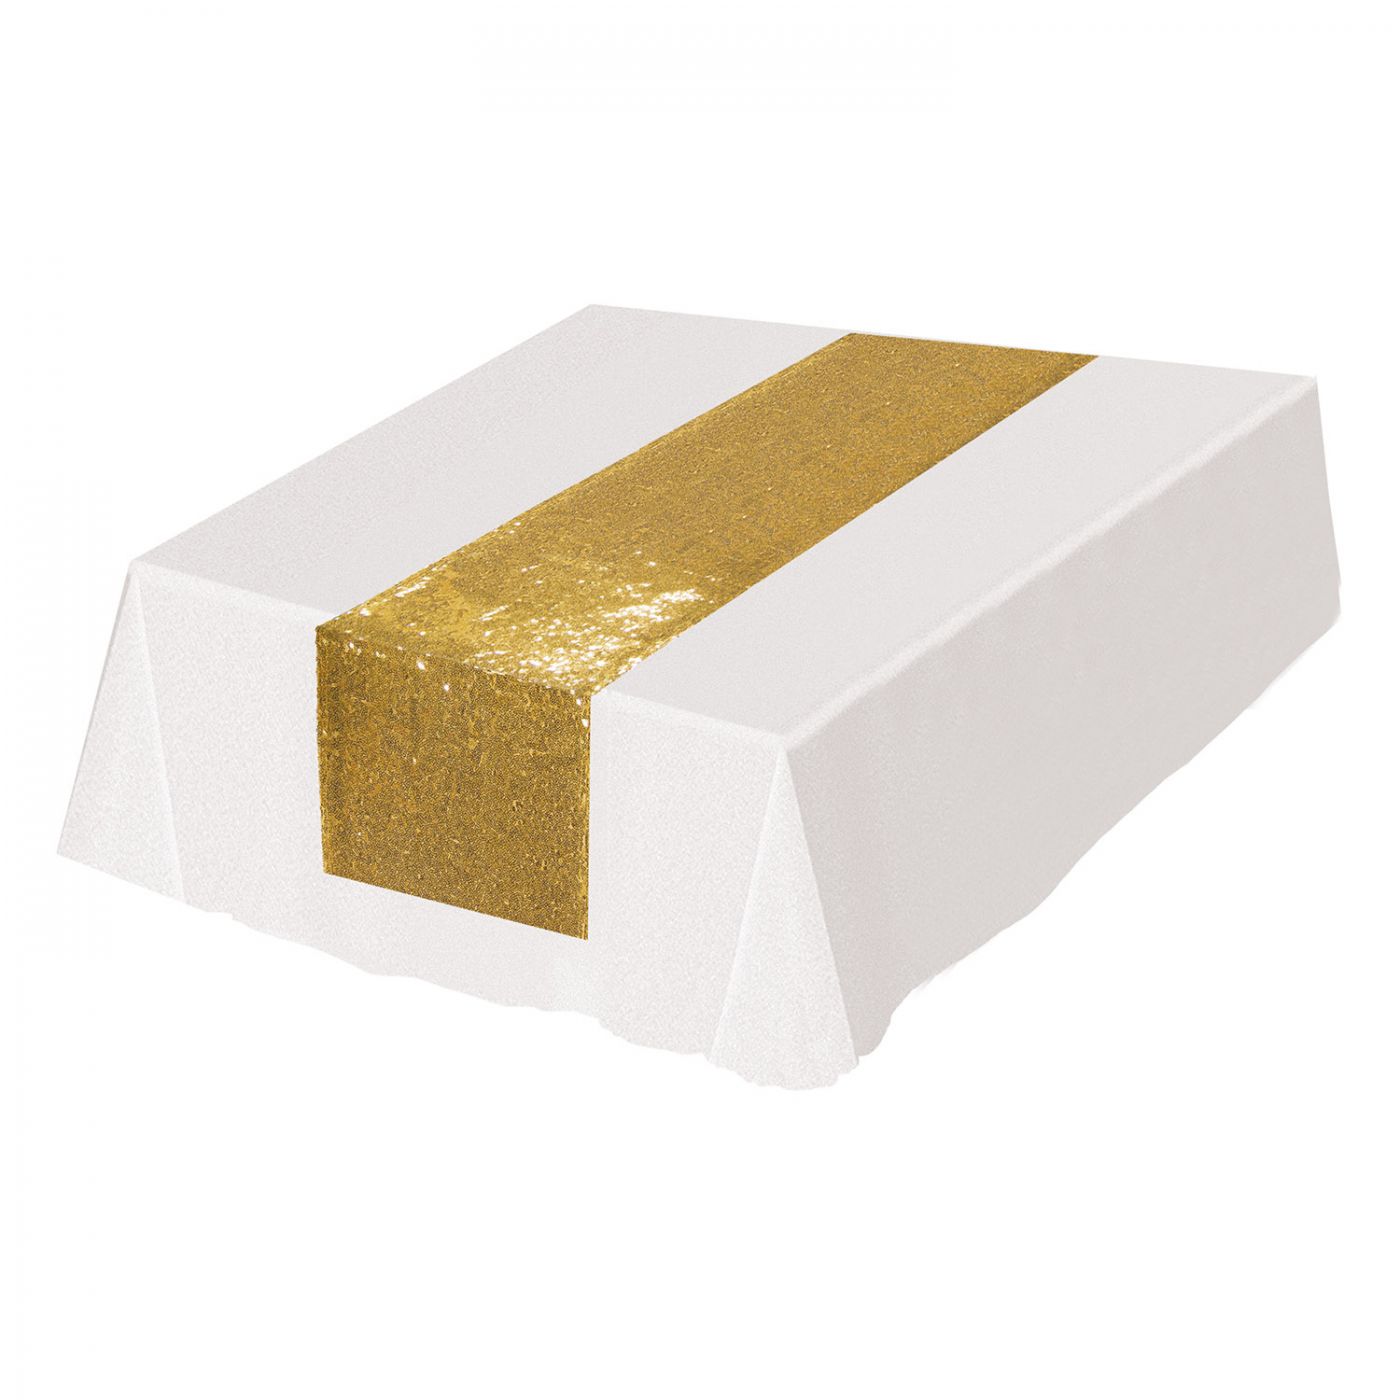 Sequined Table Runner (12) image